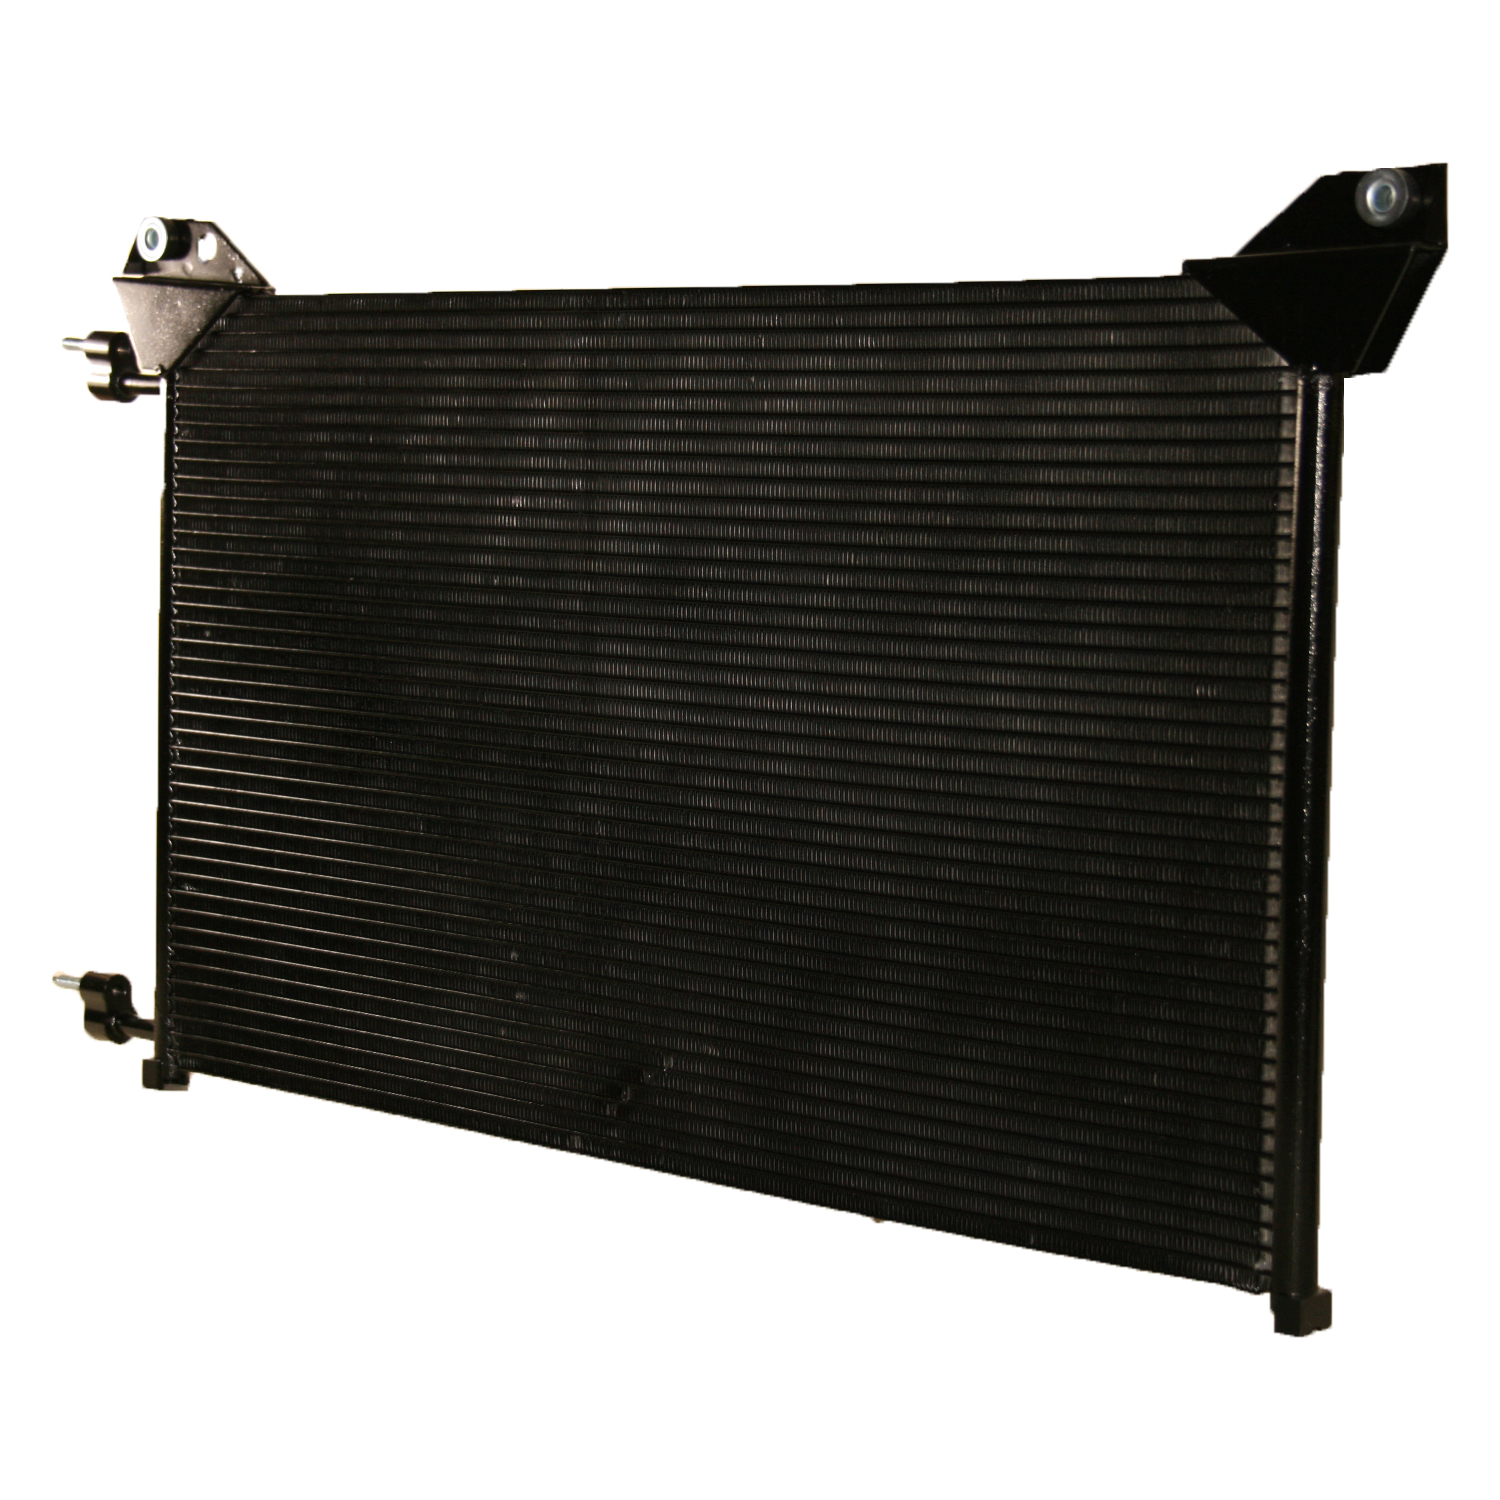 TCW Condenser 44-4953 New Product Image field_60b6a13a6e67c